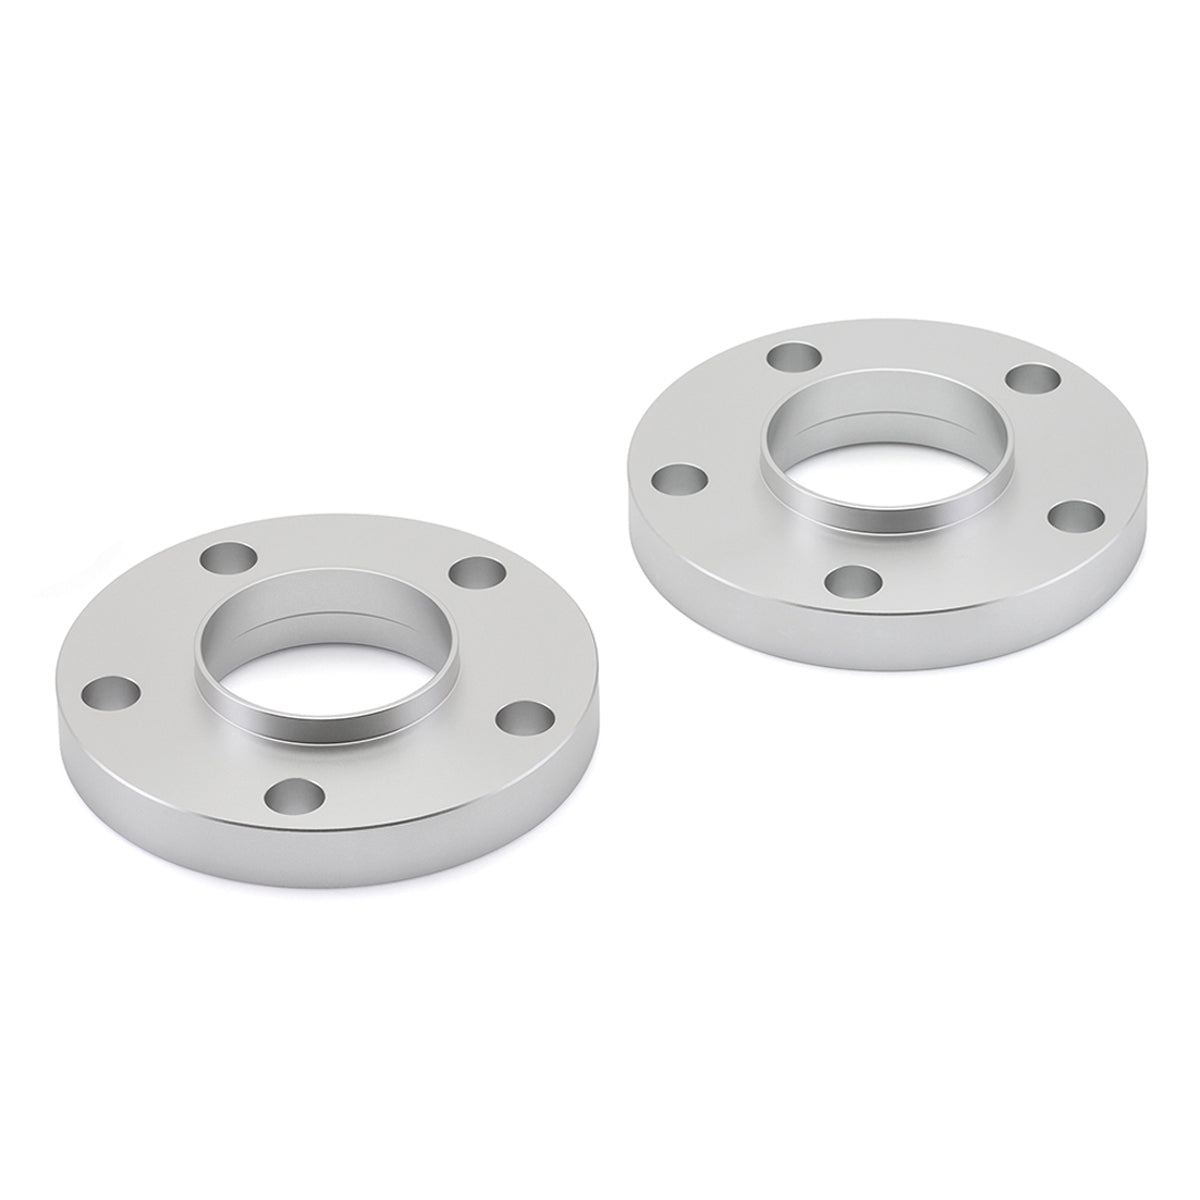 1988-2010 BMW 5 Series E34 5x120 Hubcentric Wheelcentric Wheel Spacers set of 2